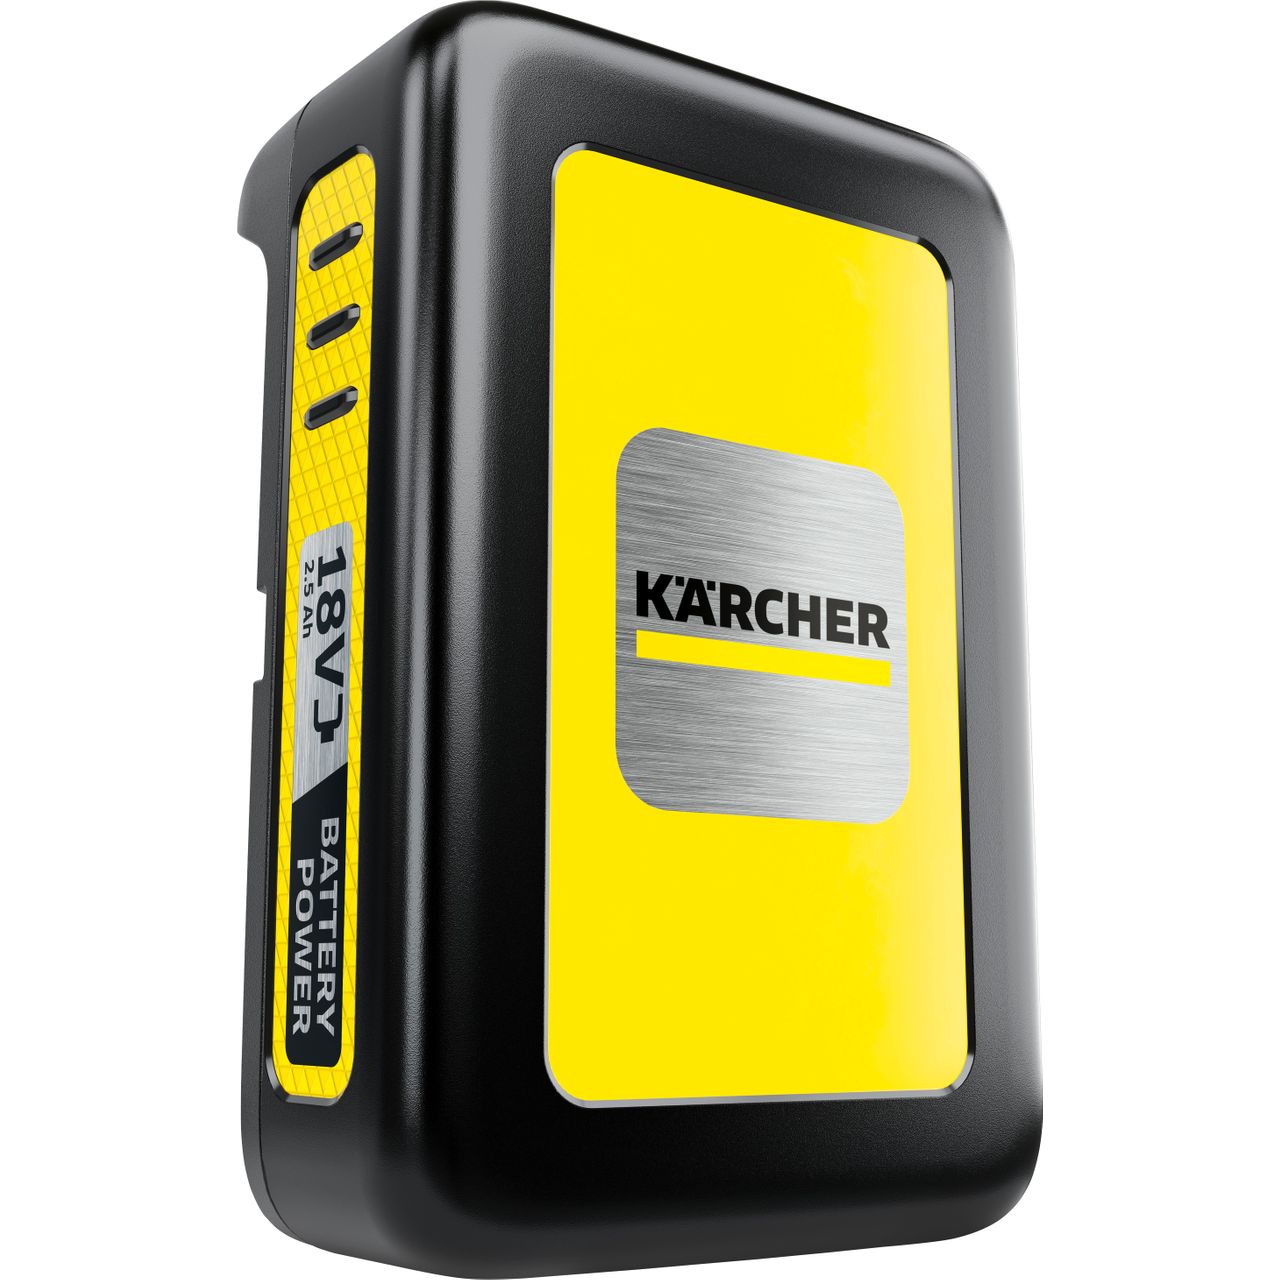 Karcher 18v 2.5Ah Battery 18 Volts Rechargeable Battery Review